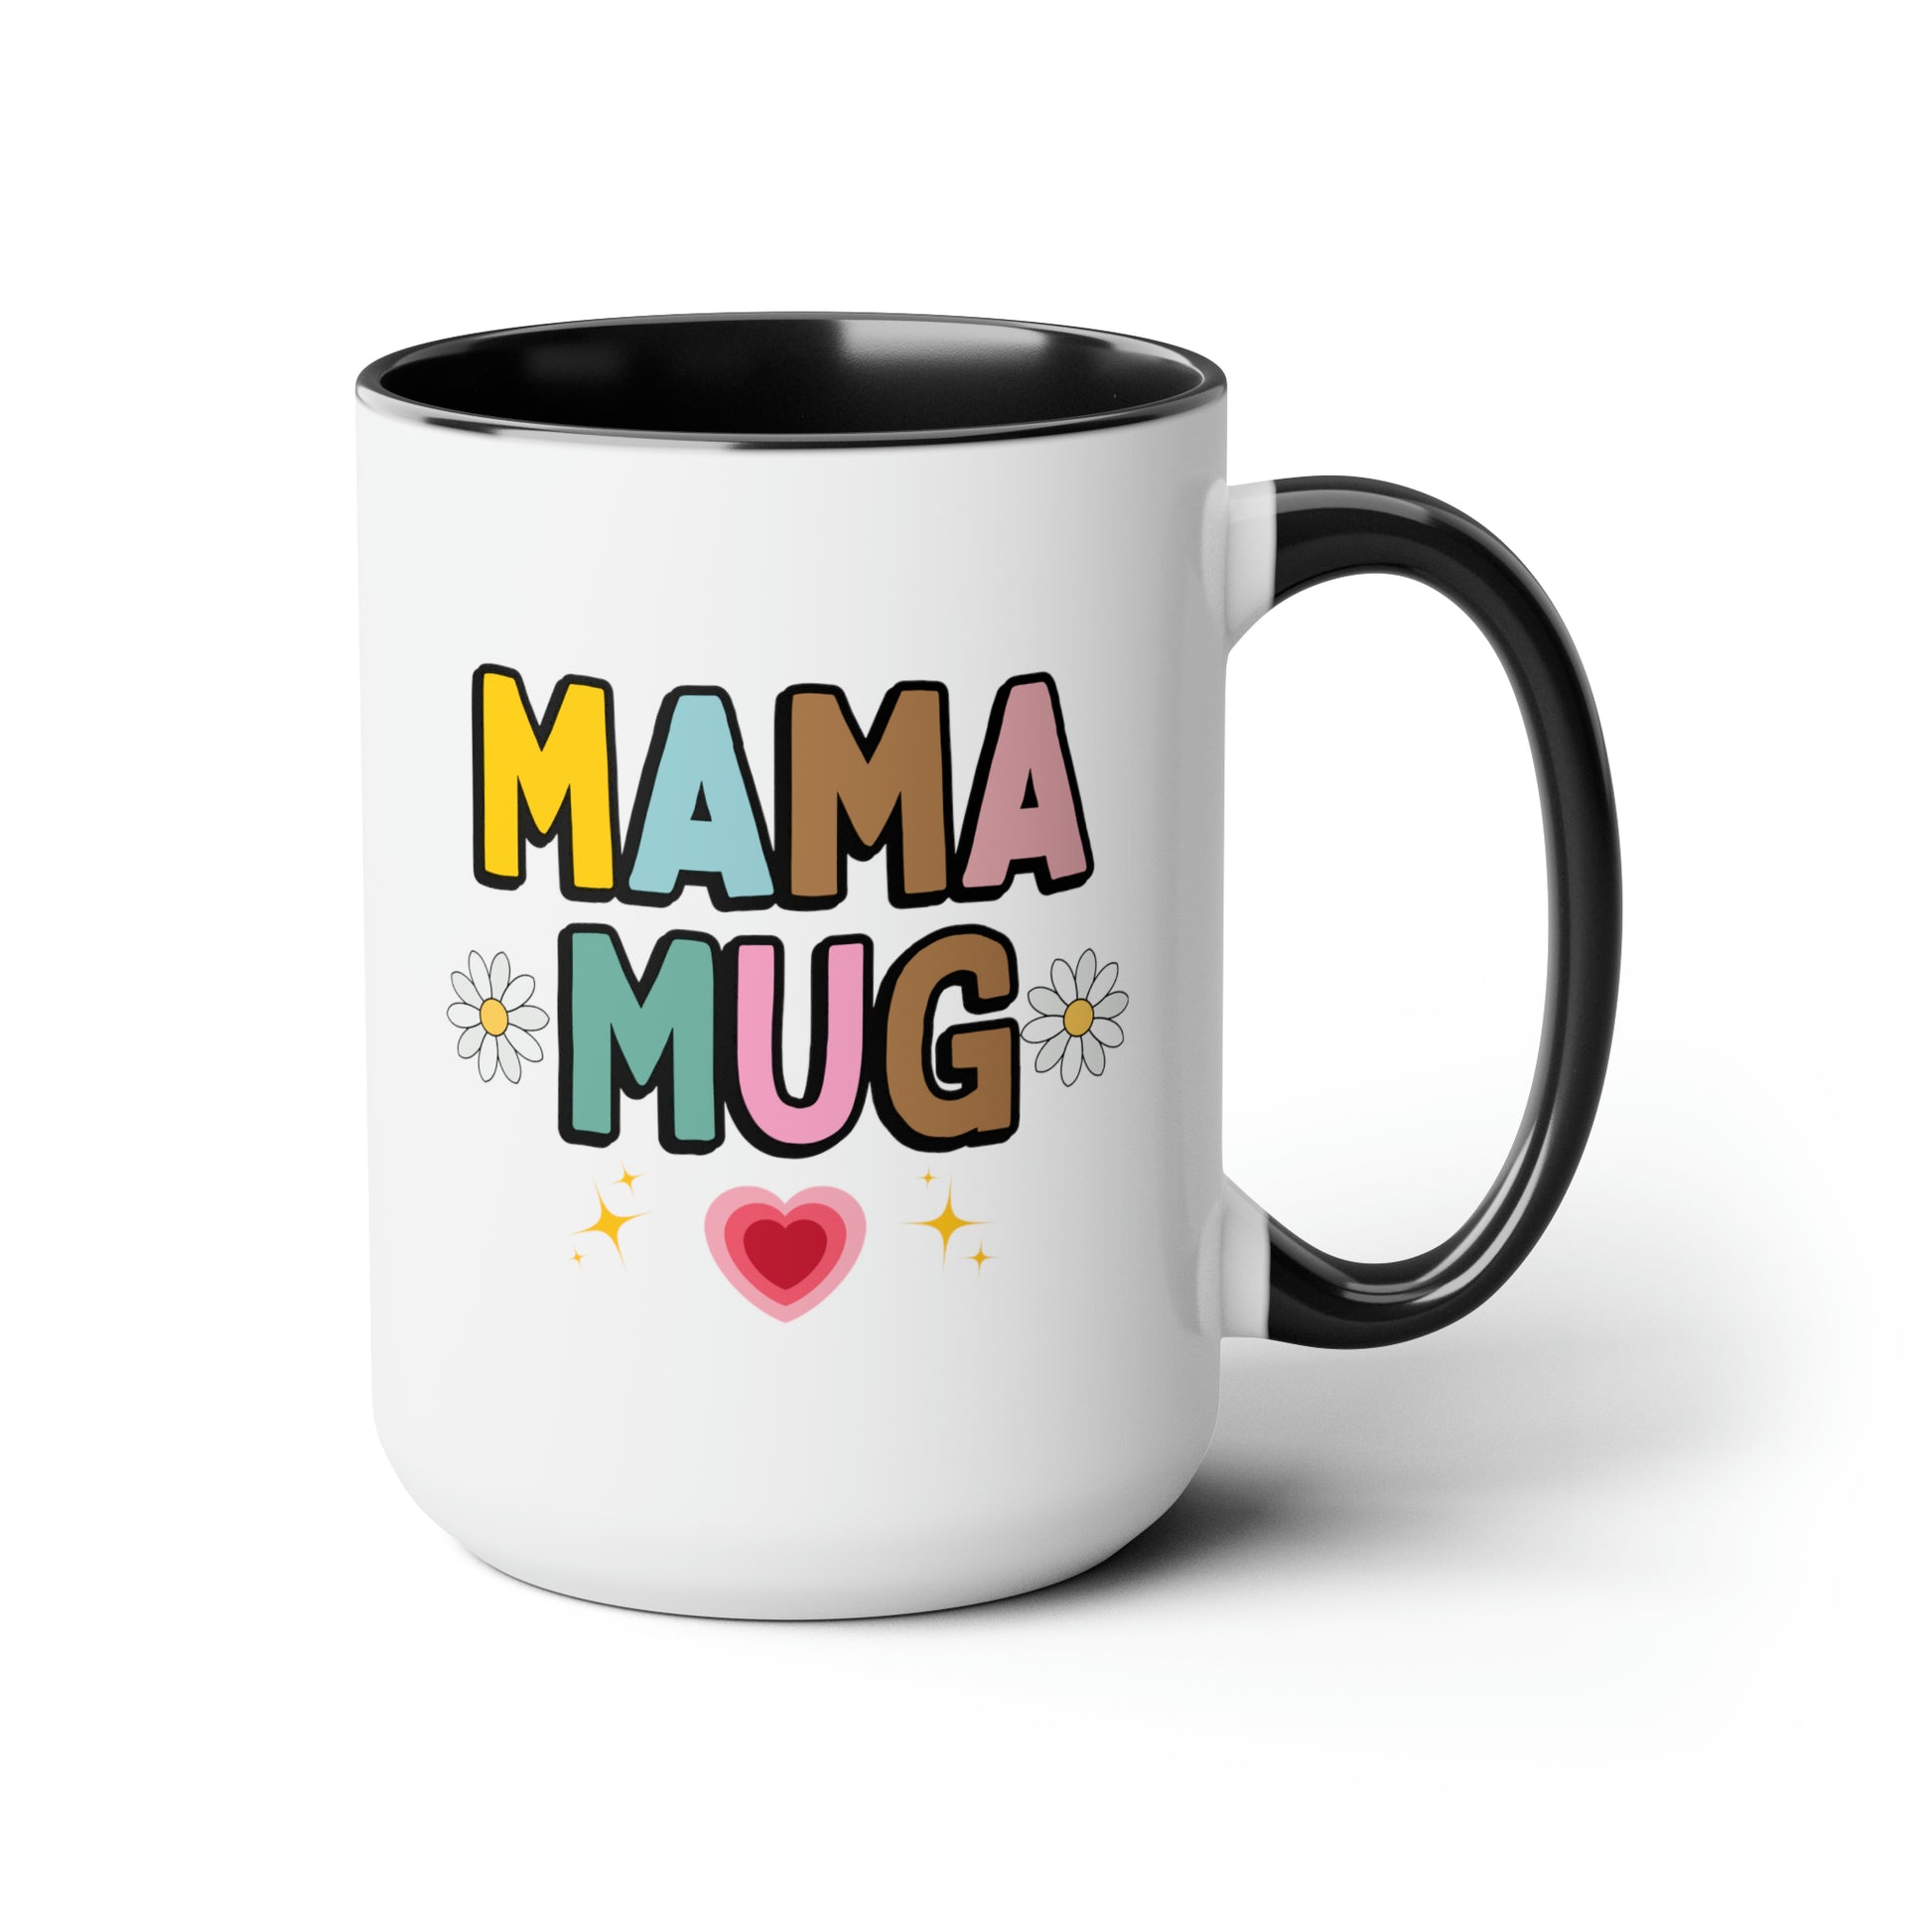 Mama Mug 15oz white with black accent funny large coffee mug gift for new mom mother pregnancy announcement baby shower waveywares wavey wares wavywares wavy wares